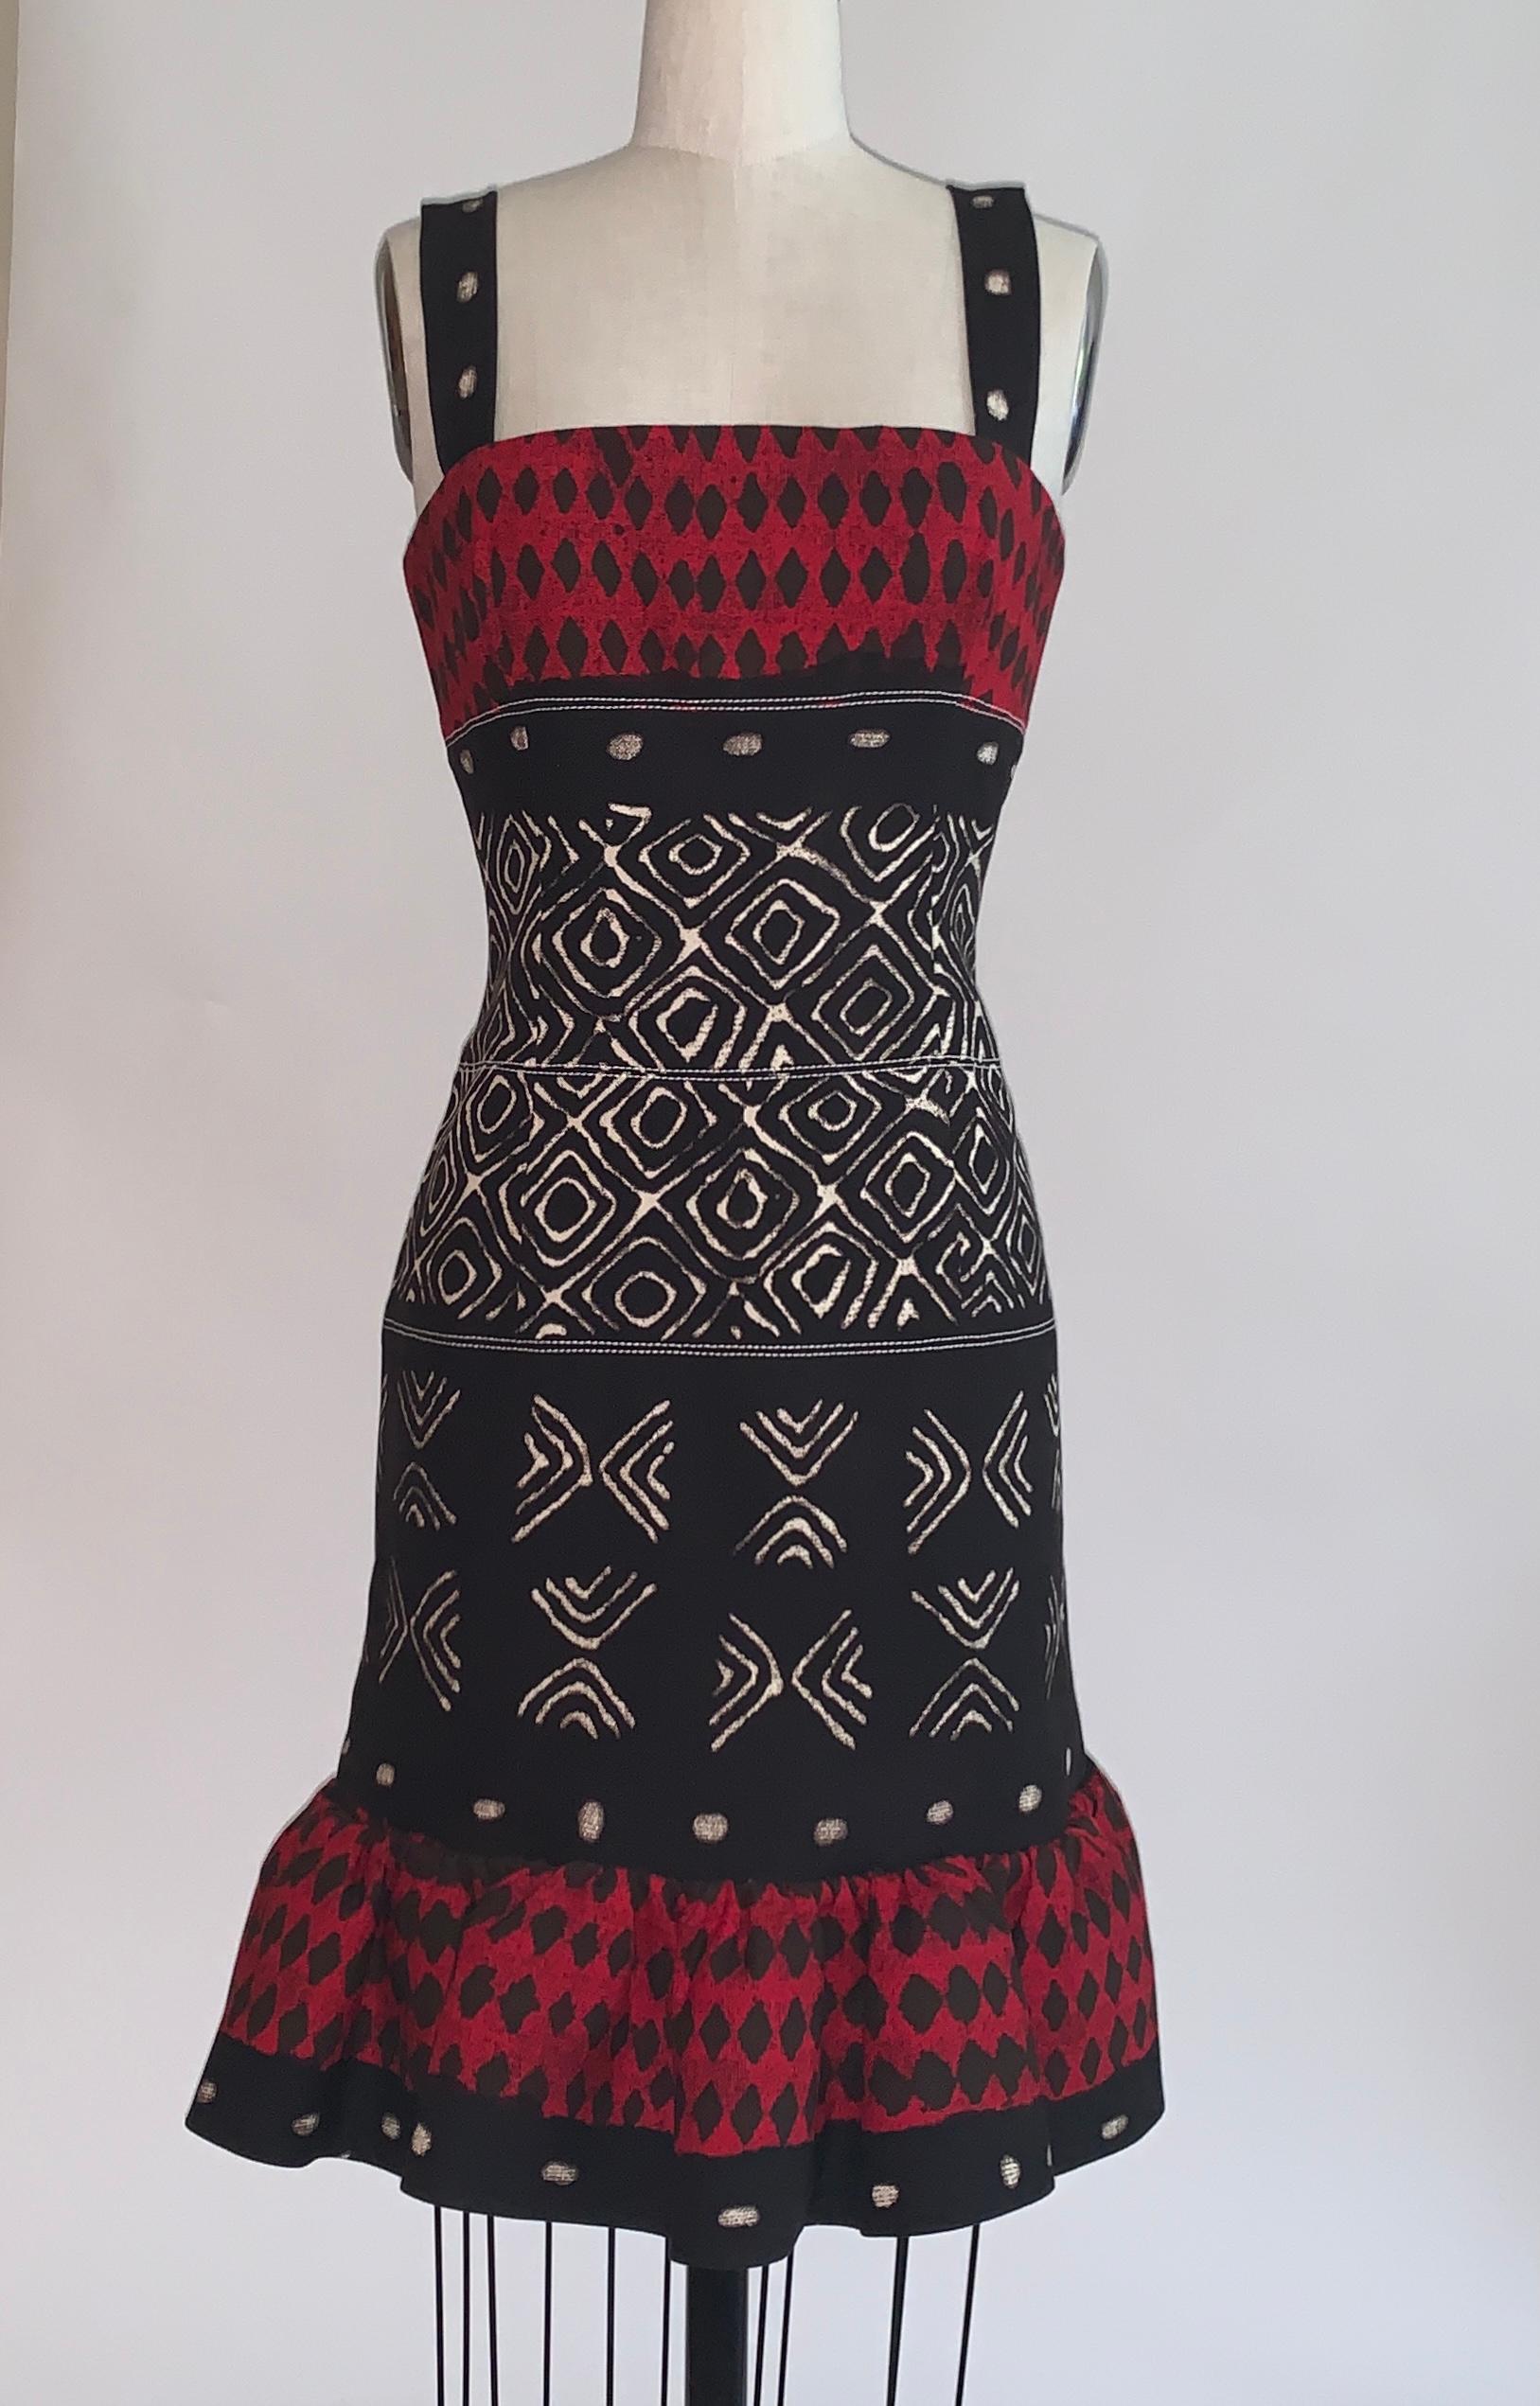 Oscar de la Renta red, black and ivory tribal ikat batik print sleeveless pencil dress with flared bottom. A thin stiff mesh ring at skirt bottom and light boning at side bust  and create dramatic shape. Back zip and hook and eye.

98% cotton, 2%